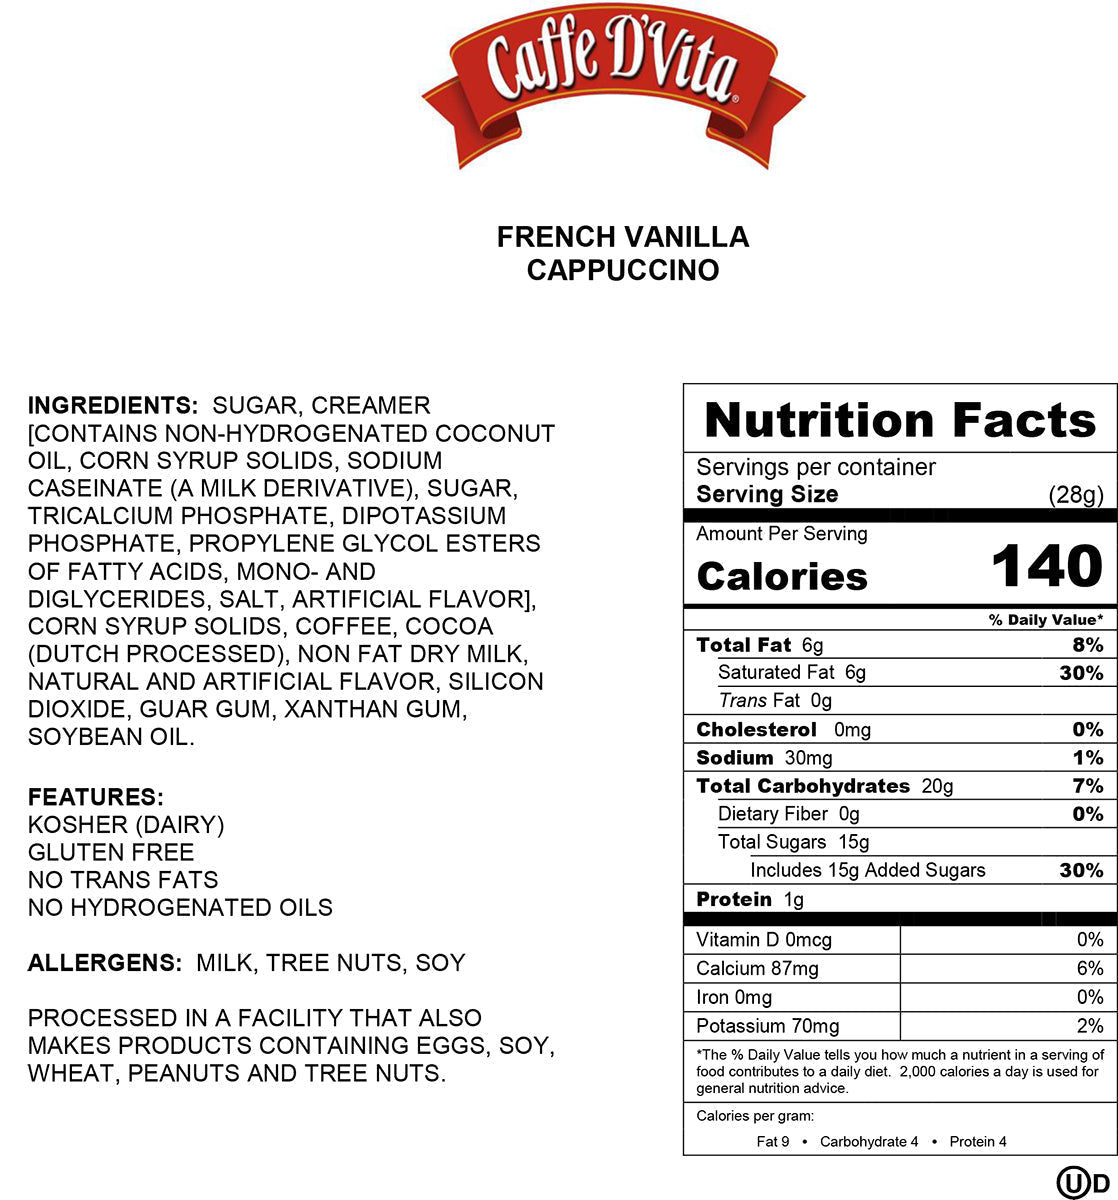 French Vanilla Cappuccino - Single Can or Case of 4 Cans - 3 lb. (48 oz.) - caffedvita